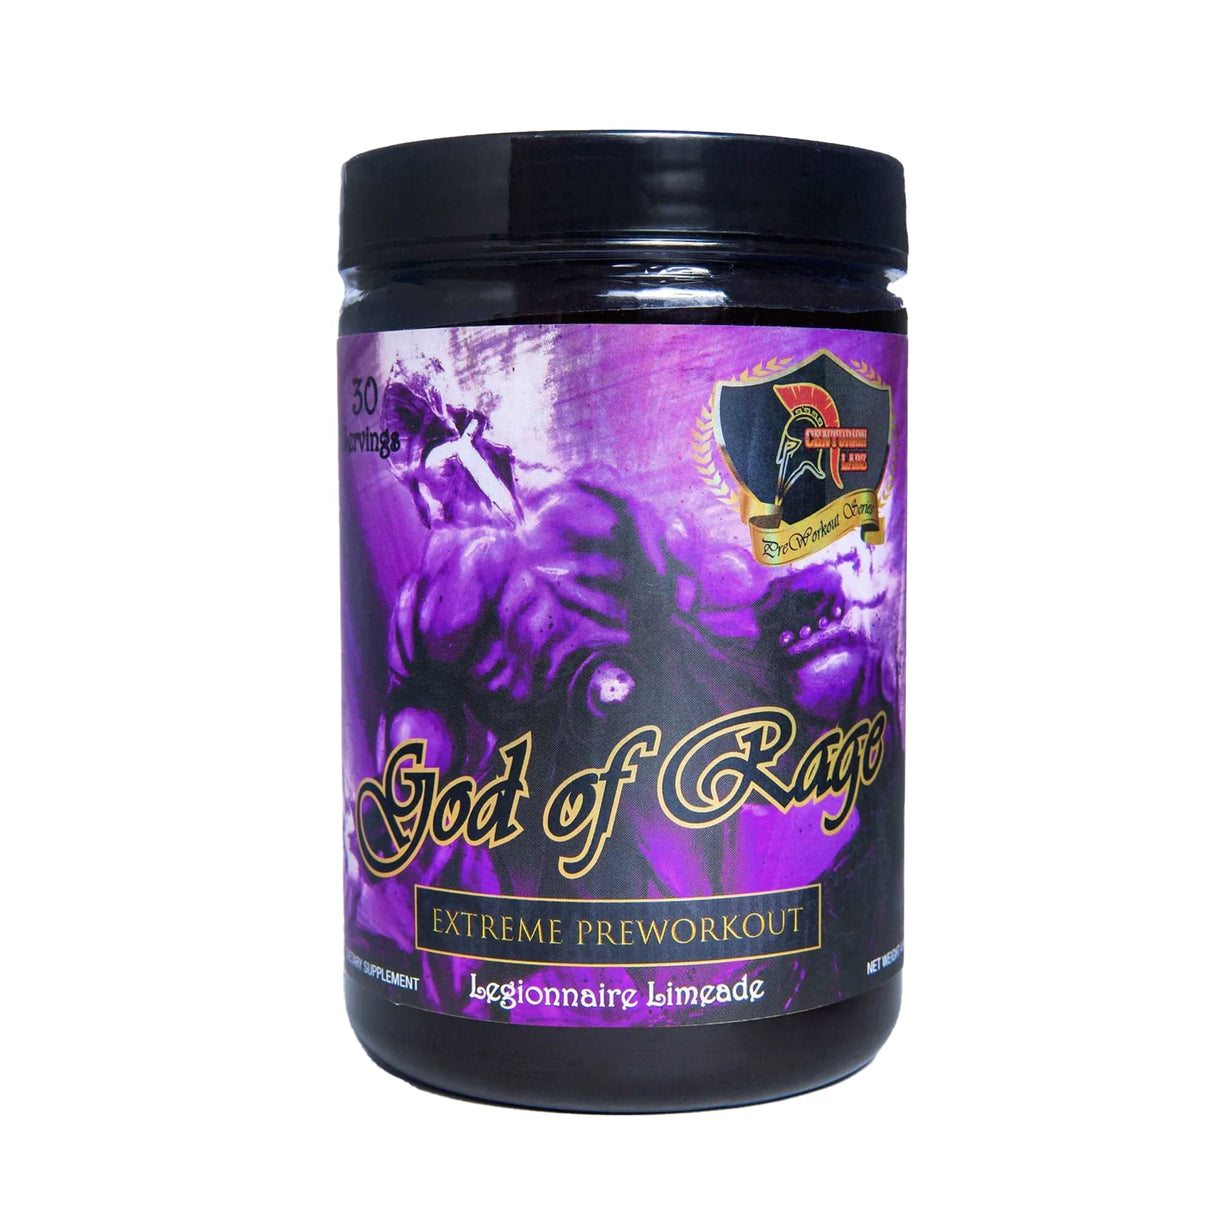 GOD OF RAGE PRE WORKOUT - Muscle Factory, LLC